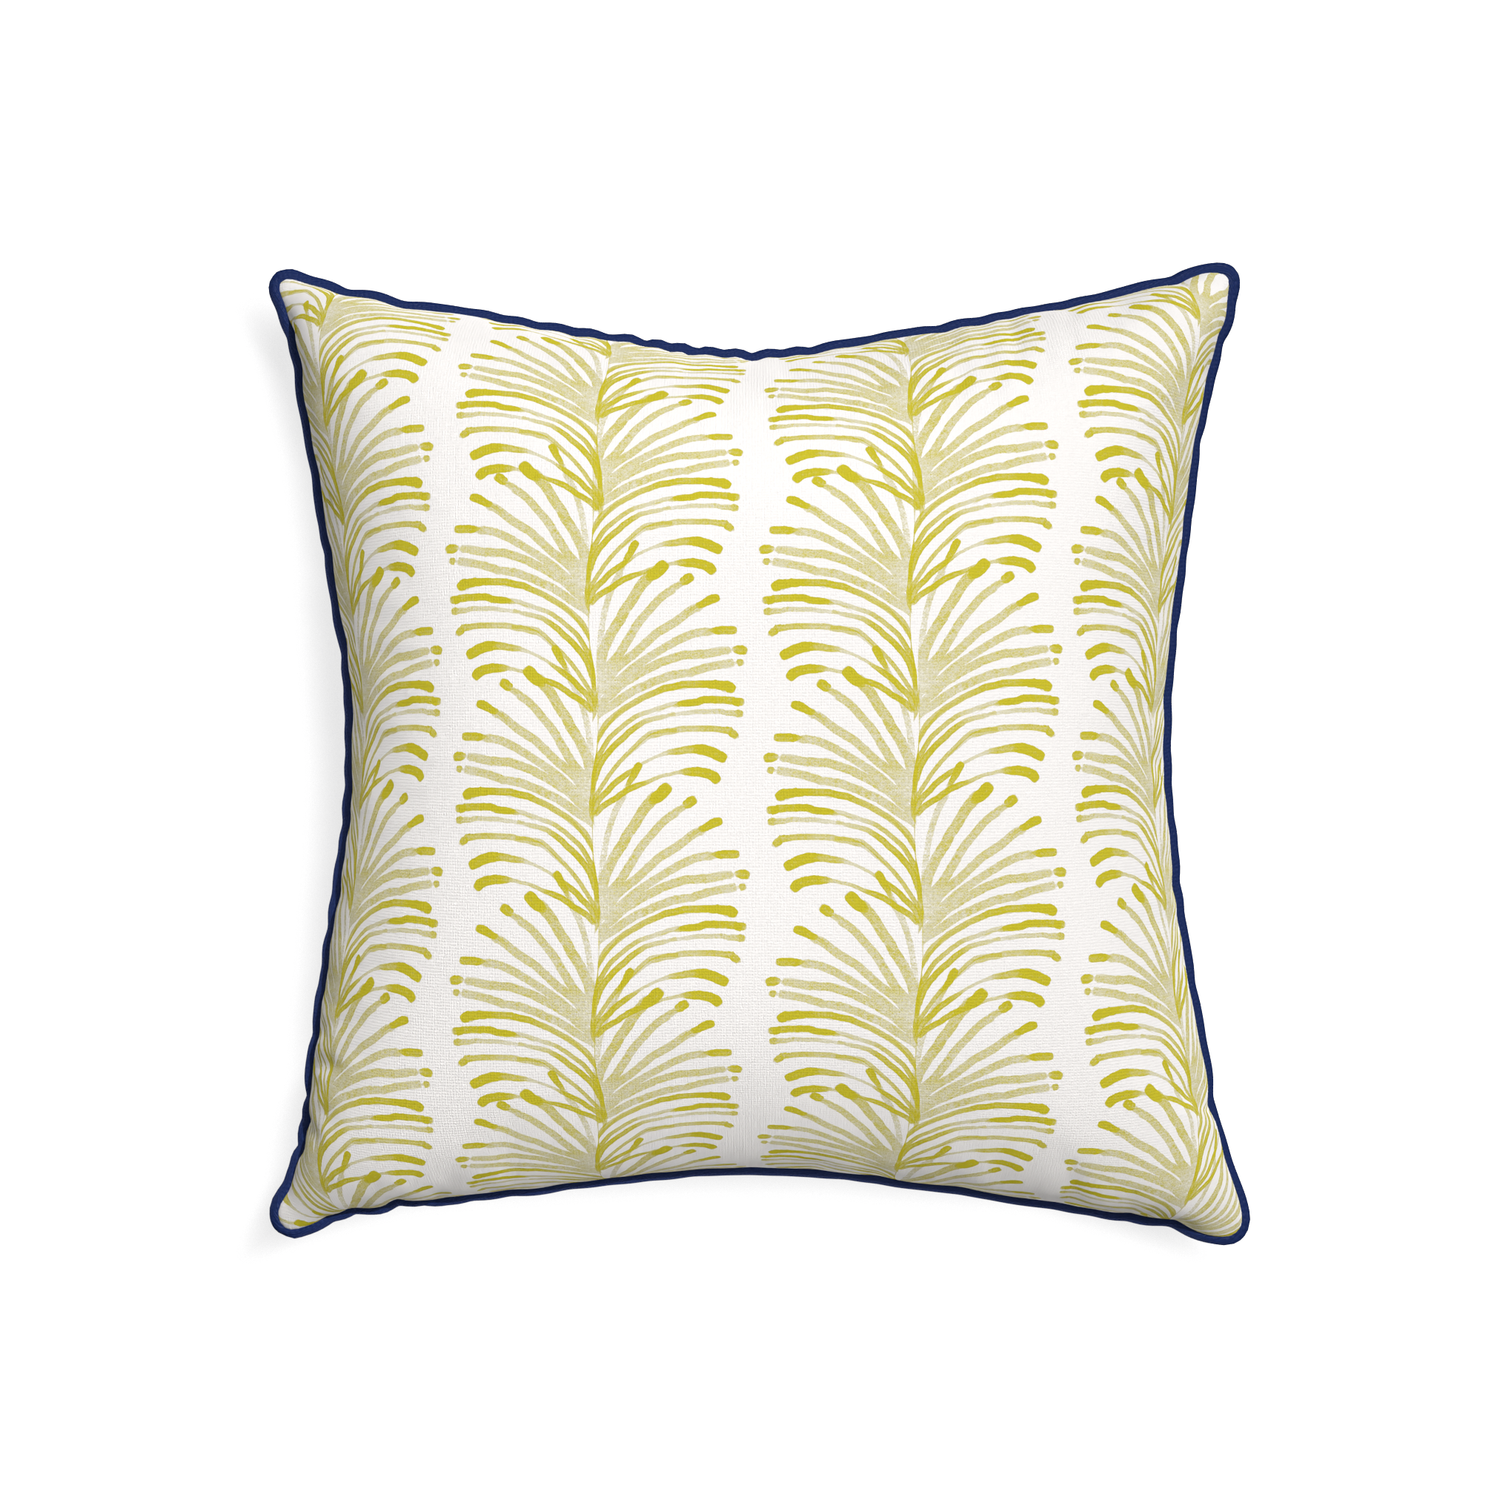 22-square emma chartreuse custom yellow stripe chartreusepillow with midnight piping on white background